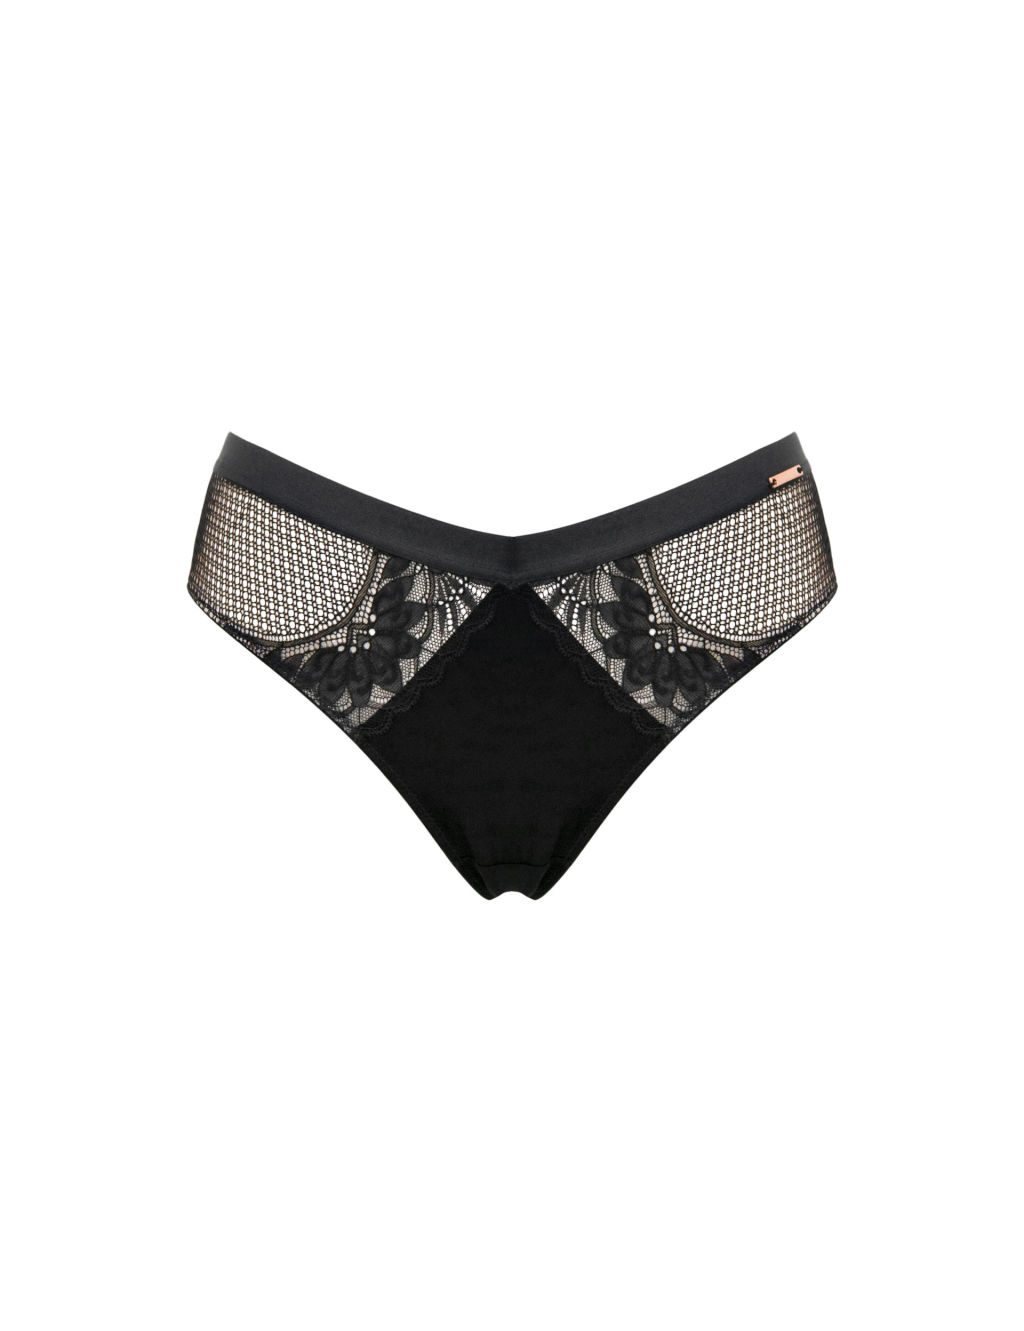 India Gatsby Mesh & Lace Briefs 1 of 7